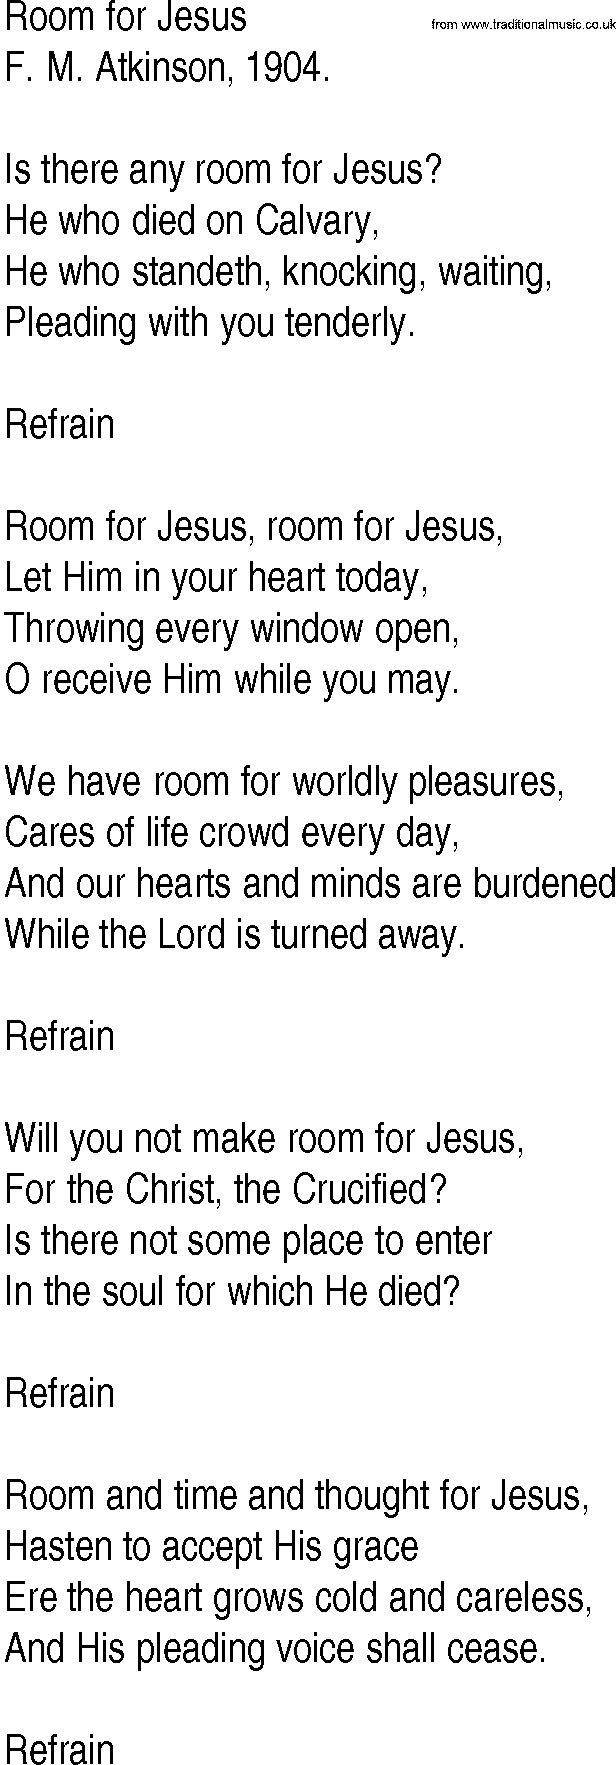 Hymn and Gospel Song: Room for Jesus by F M Atkinson lyrics